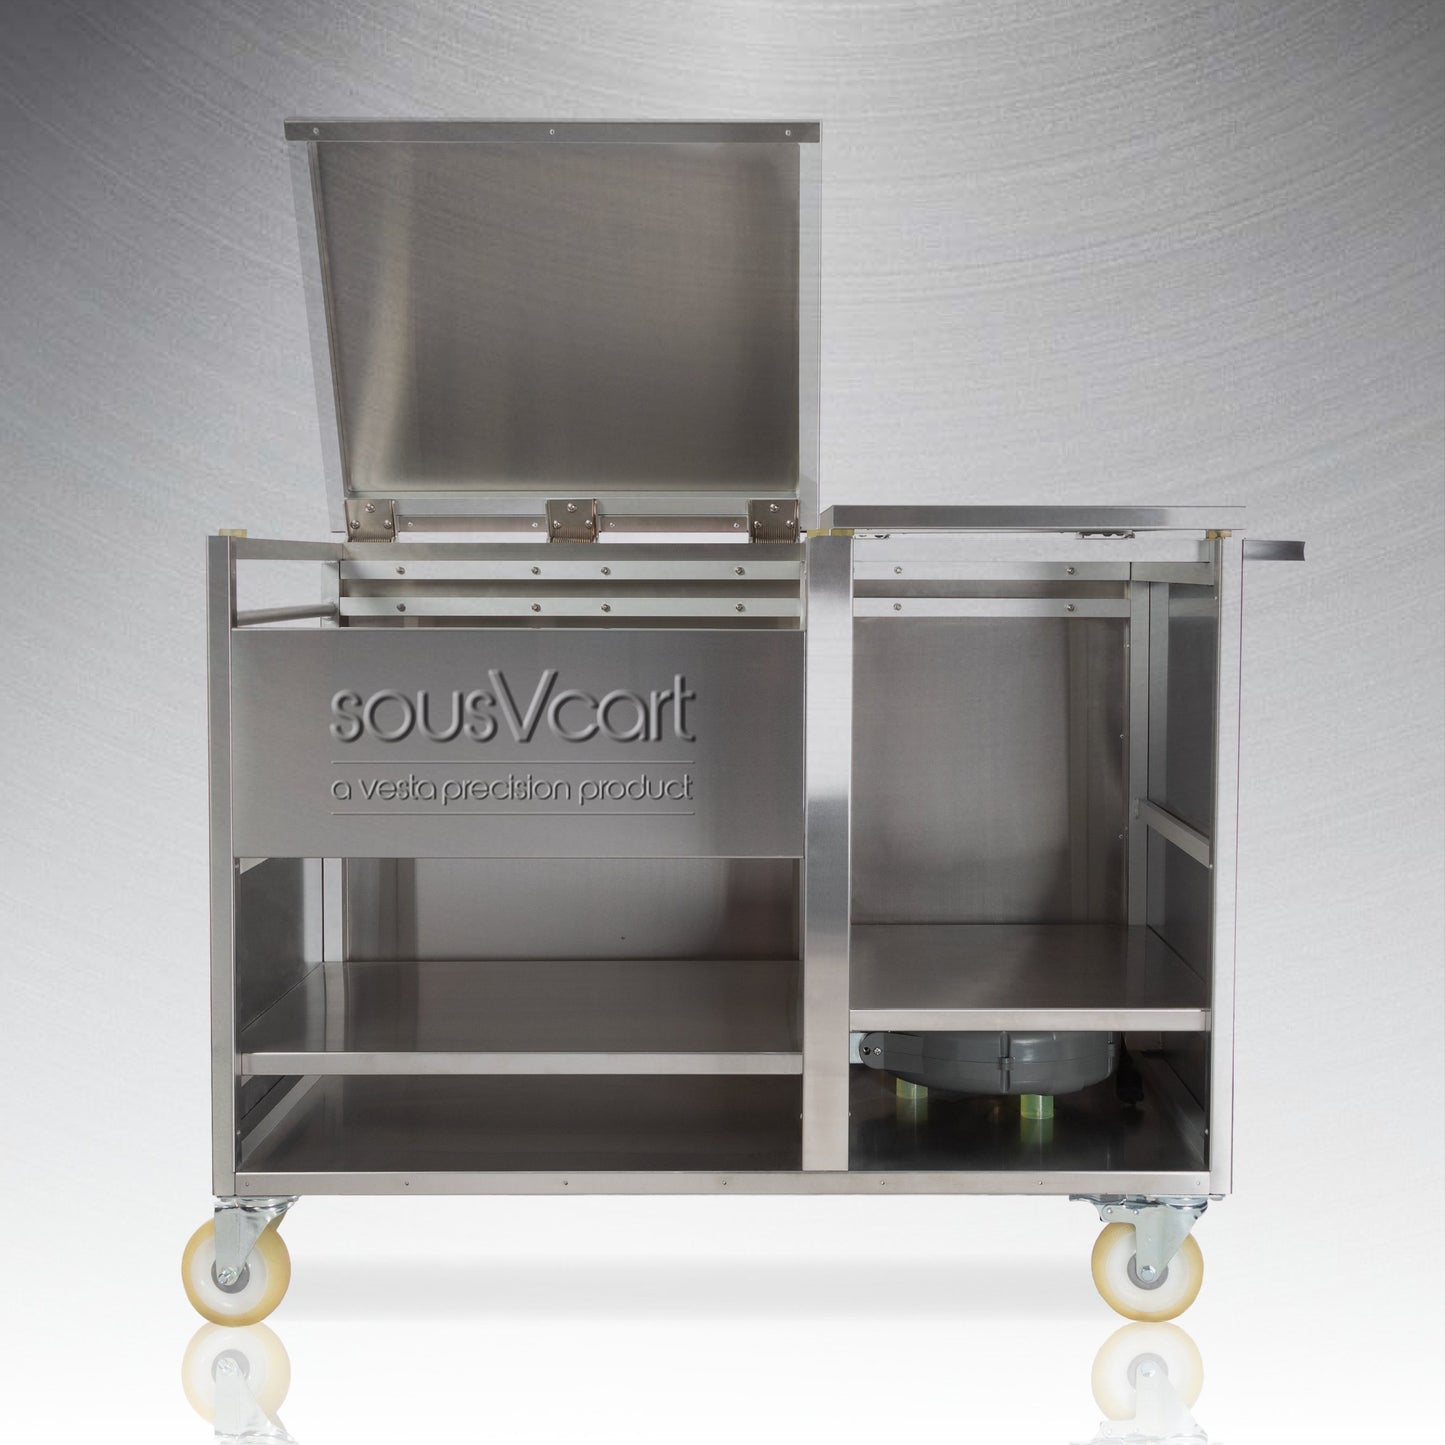 SousVcart, Mobile Cooking Station